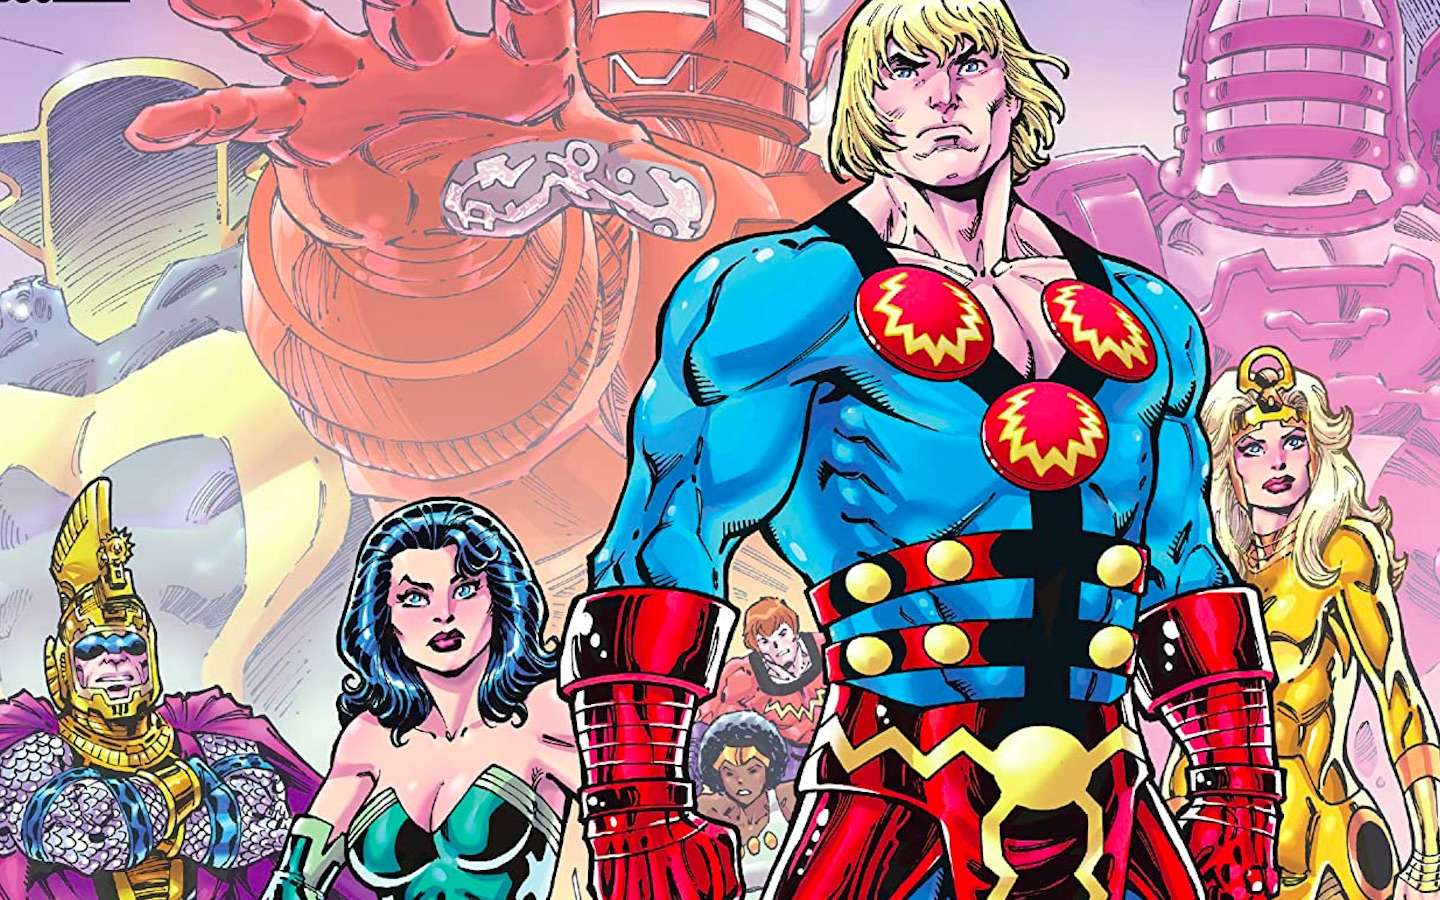 Eternals: Kevin Feige teases Gemma Chan as main character